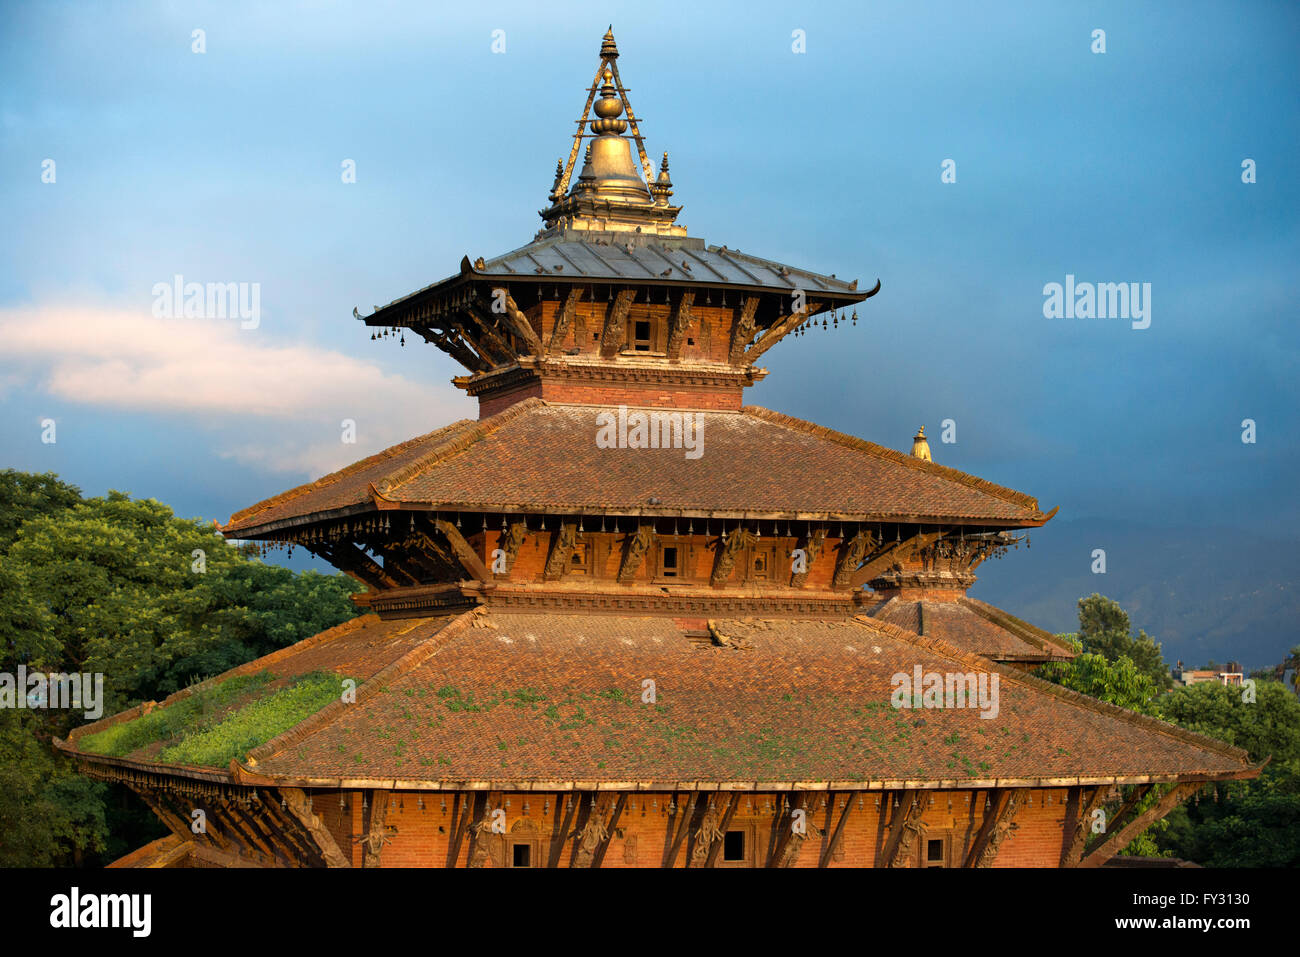 One of the buildings of the Royal Palace located in Patan Durbar Square, Kathmandu, Nepal. Stock Photo